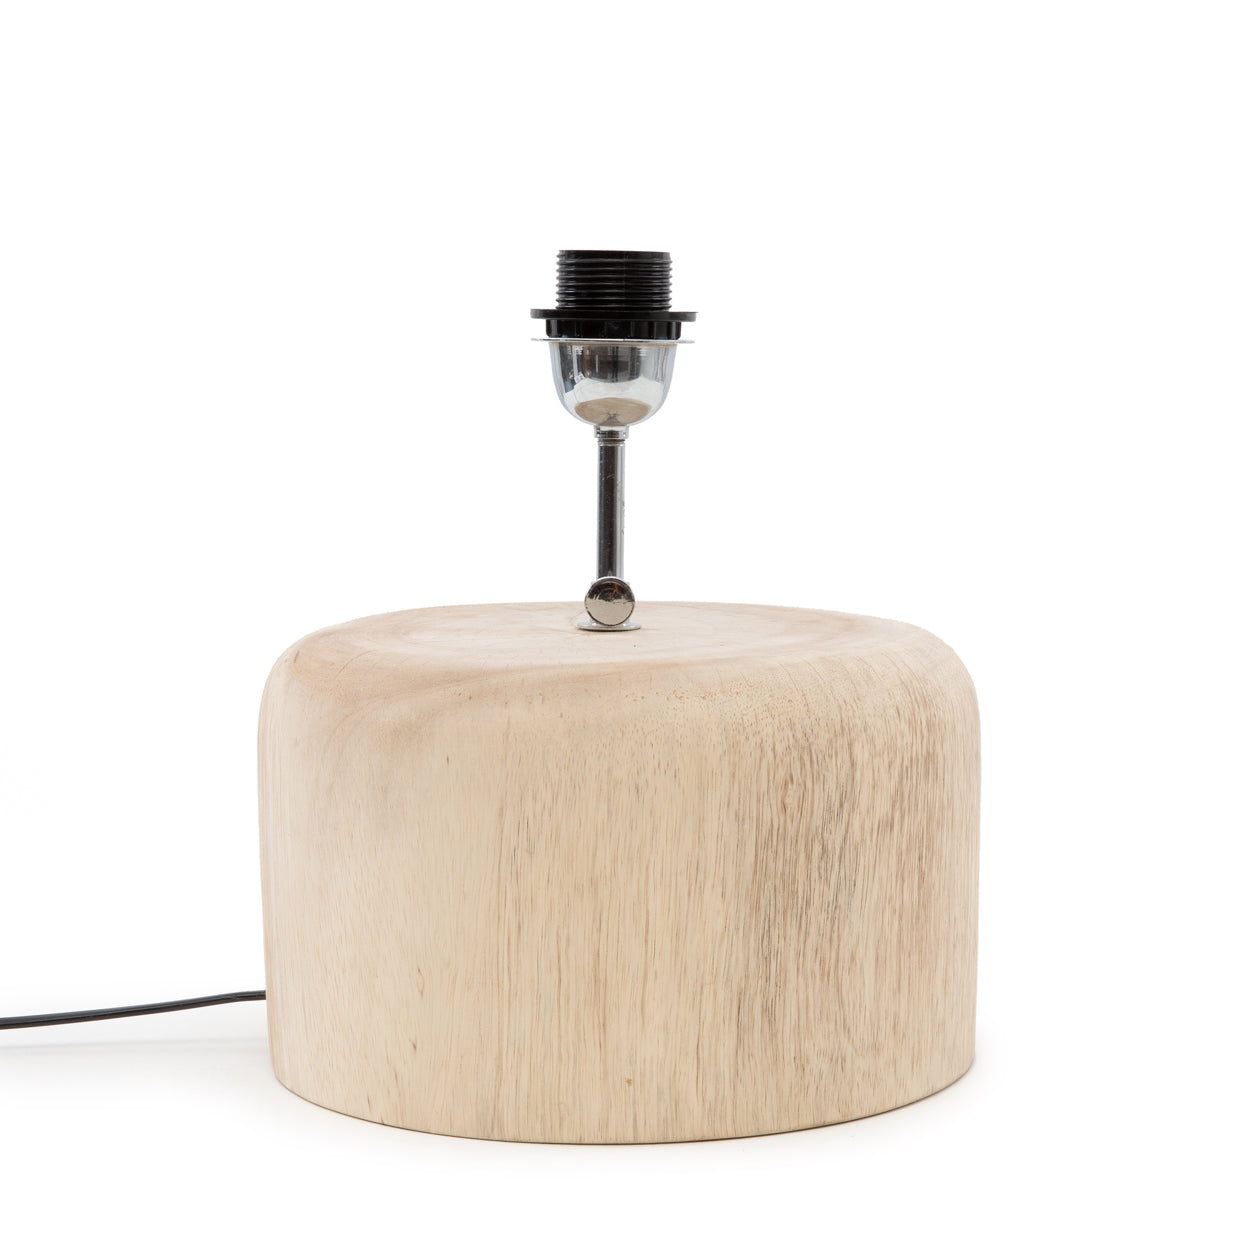 THE TEAK WOOD Table Lamp Base front view